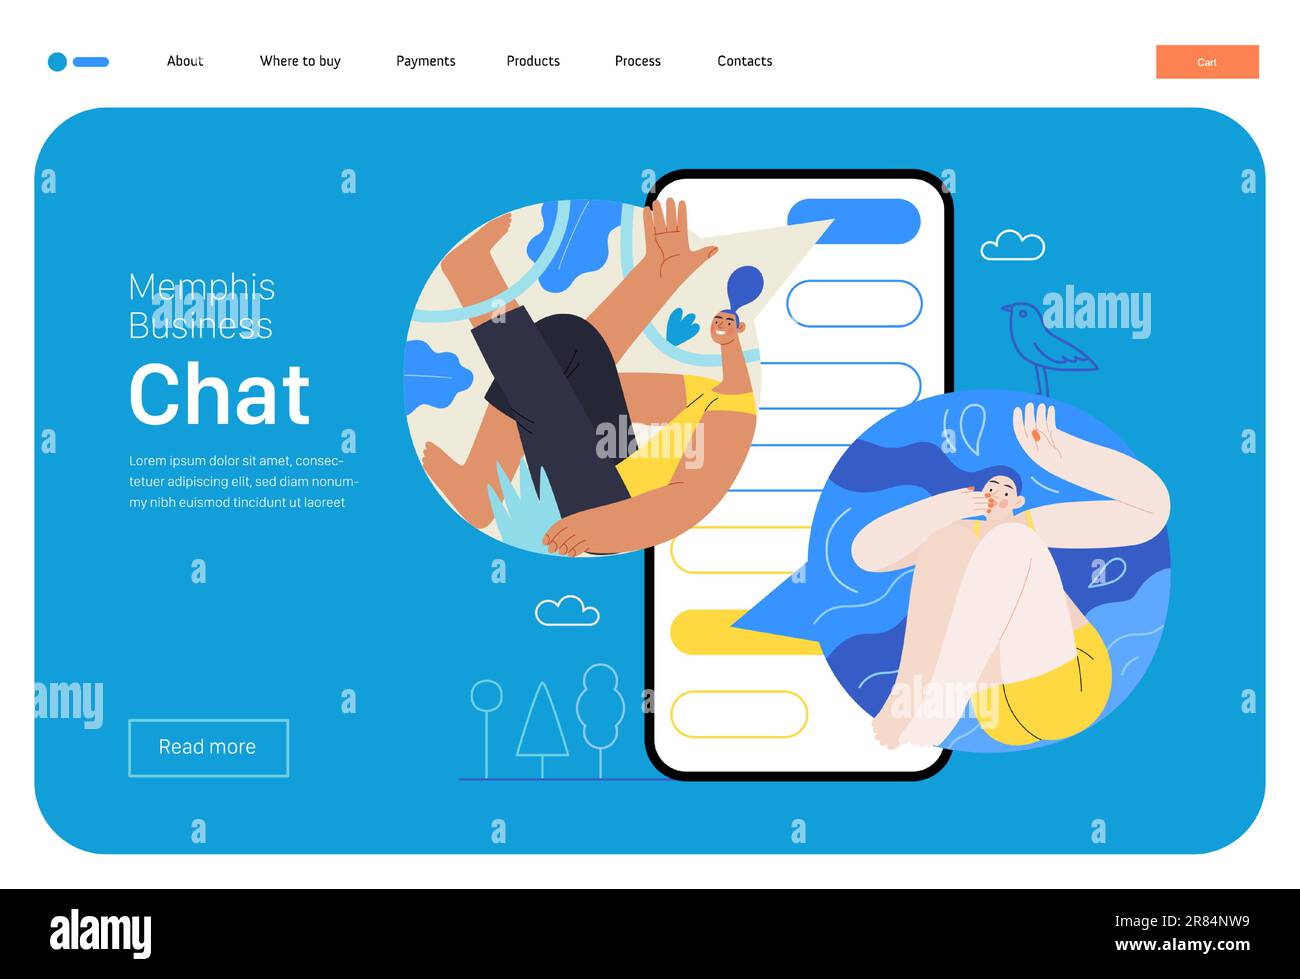 Memphis business illustration. Chat -modern flat vector concept illustration of people chatting in a phone messenger app, conversation, relations. Com Stock Vector